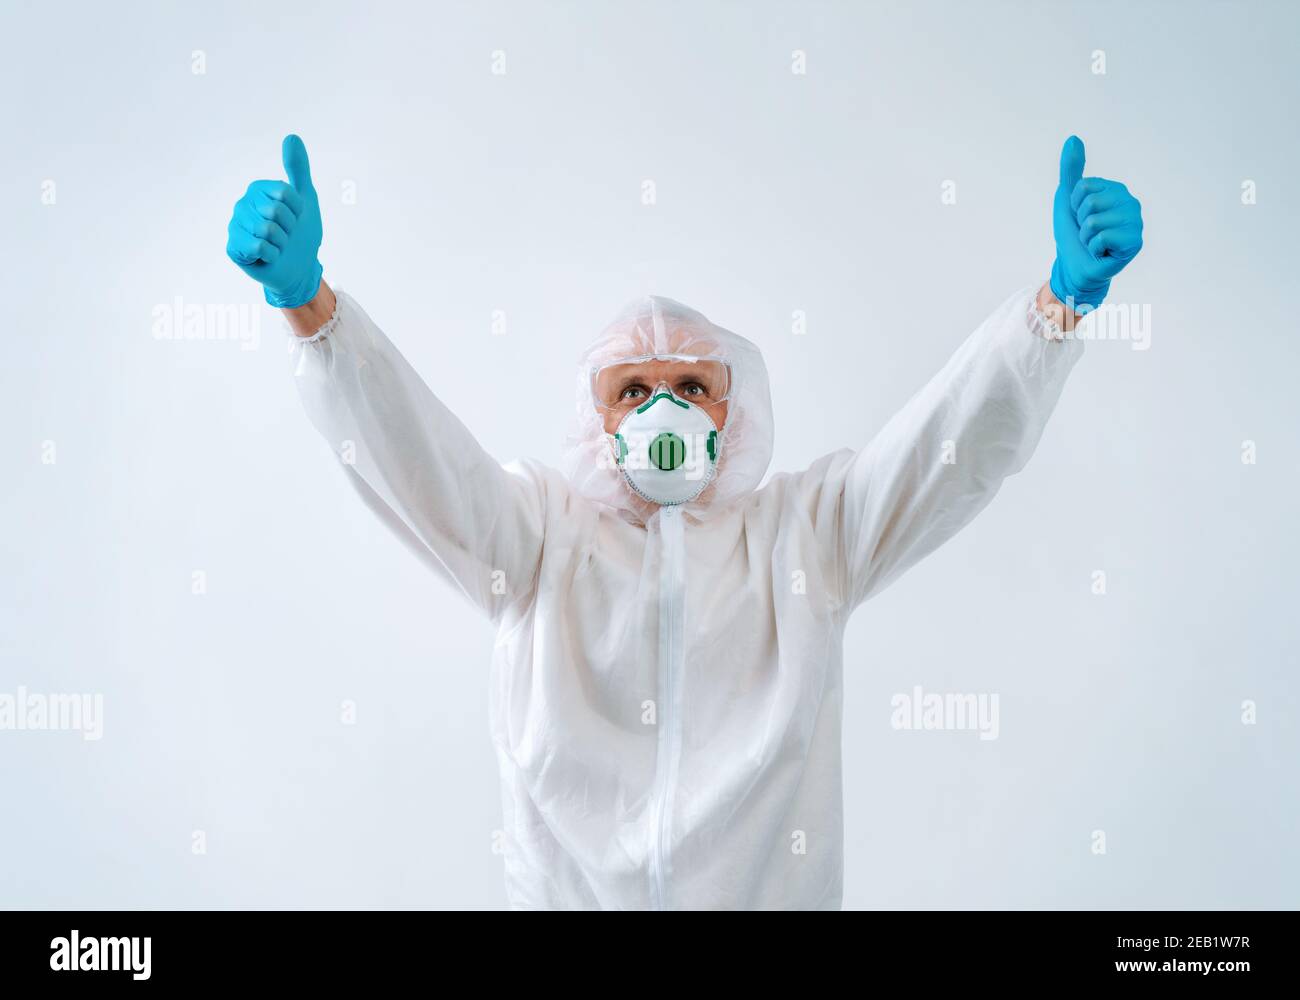 Healthcare worker  in protective suit and medical mask shows thumbs up with both hands, like gesture. Stock Photo